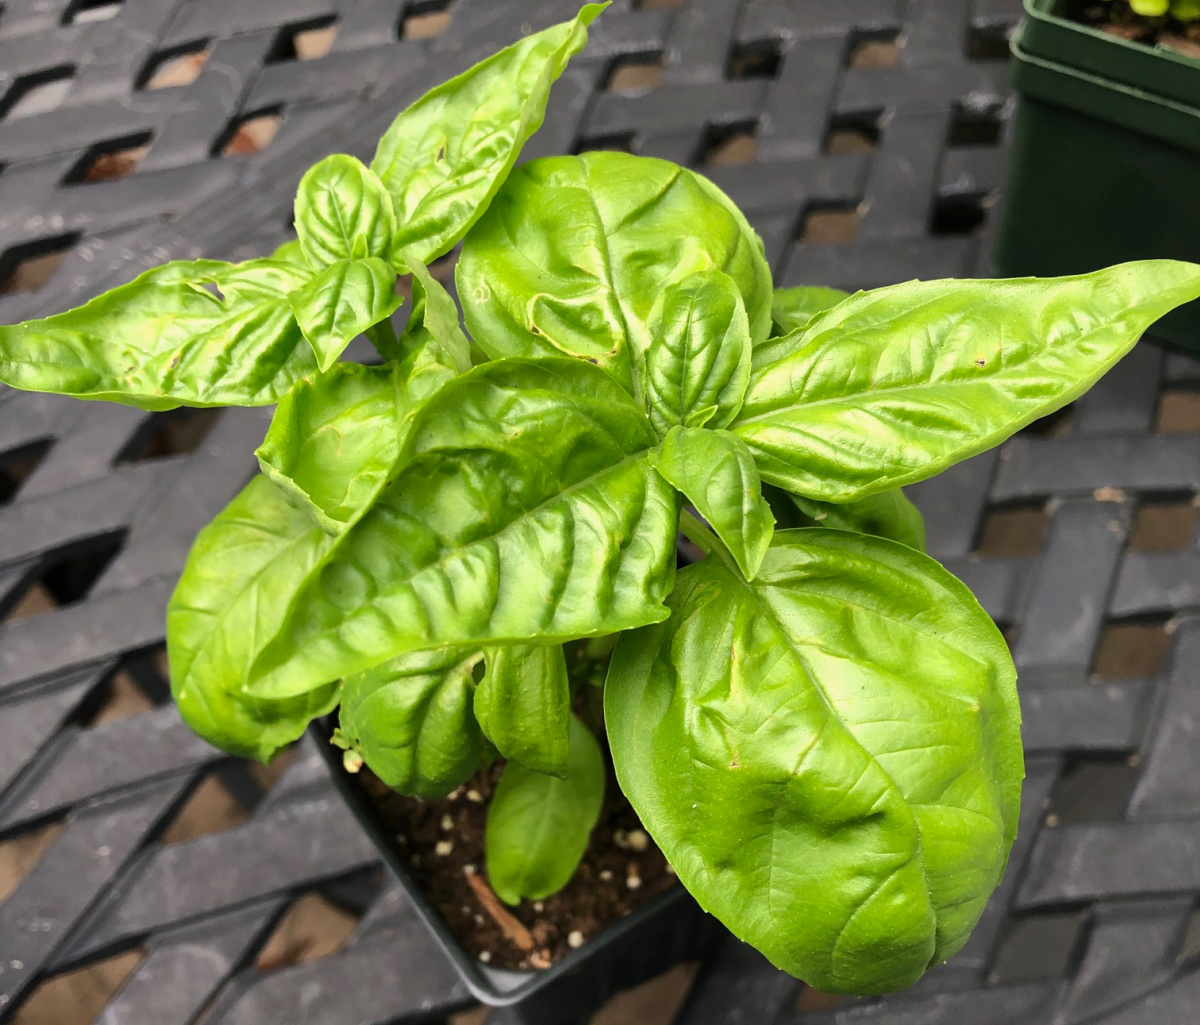 Sweet basil plant in a nursery container.